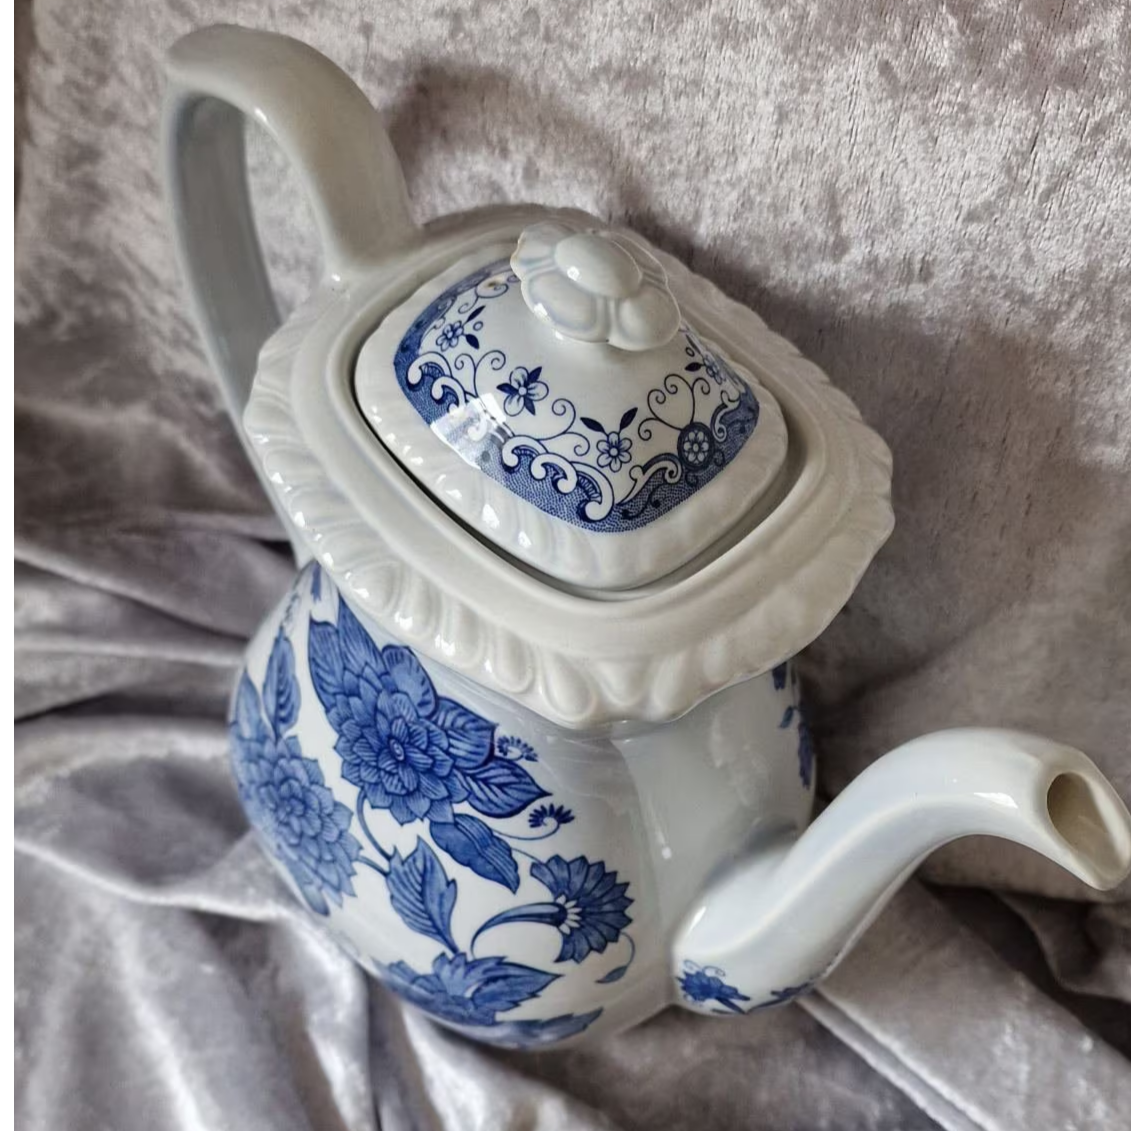 Elegant Adams 'Blue Butterfly' porcelain teapot featuring a beautiful blue and white floral pattern.